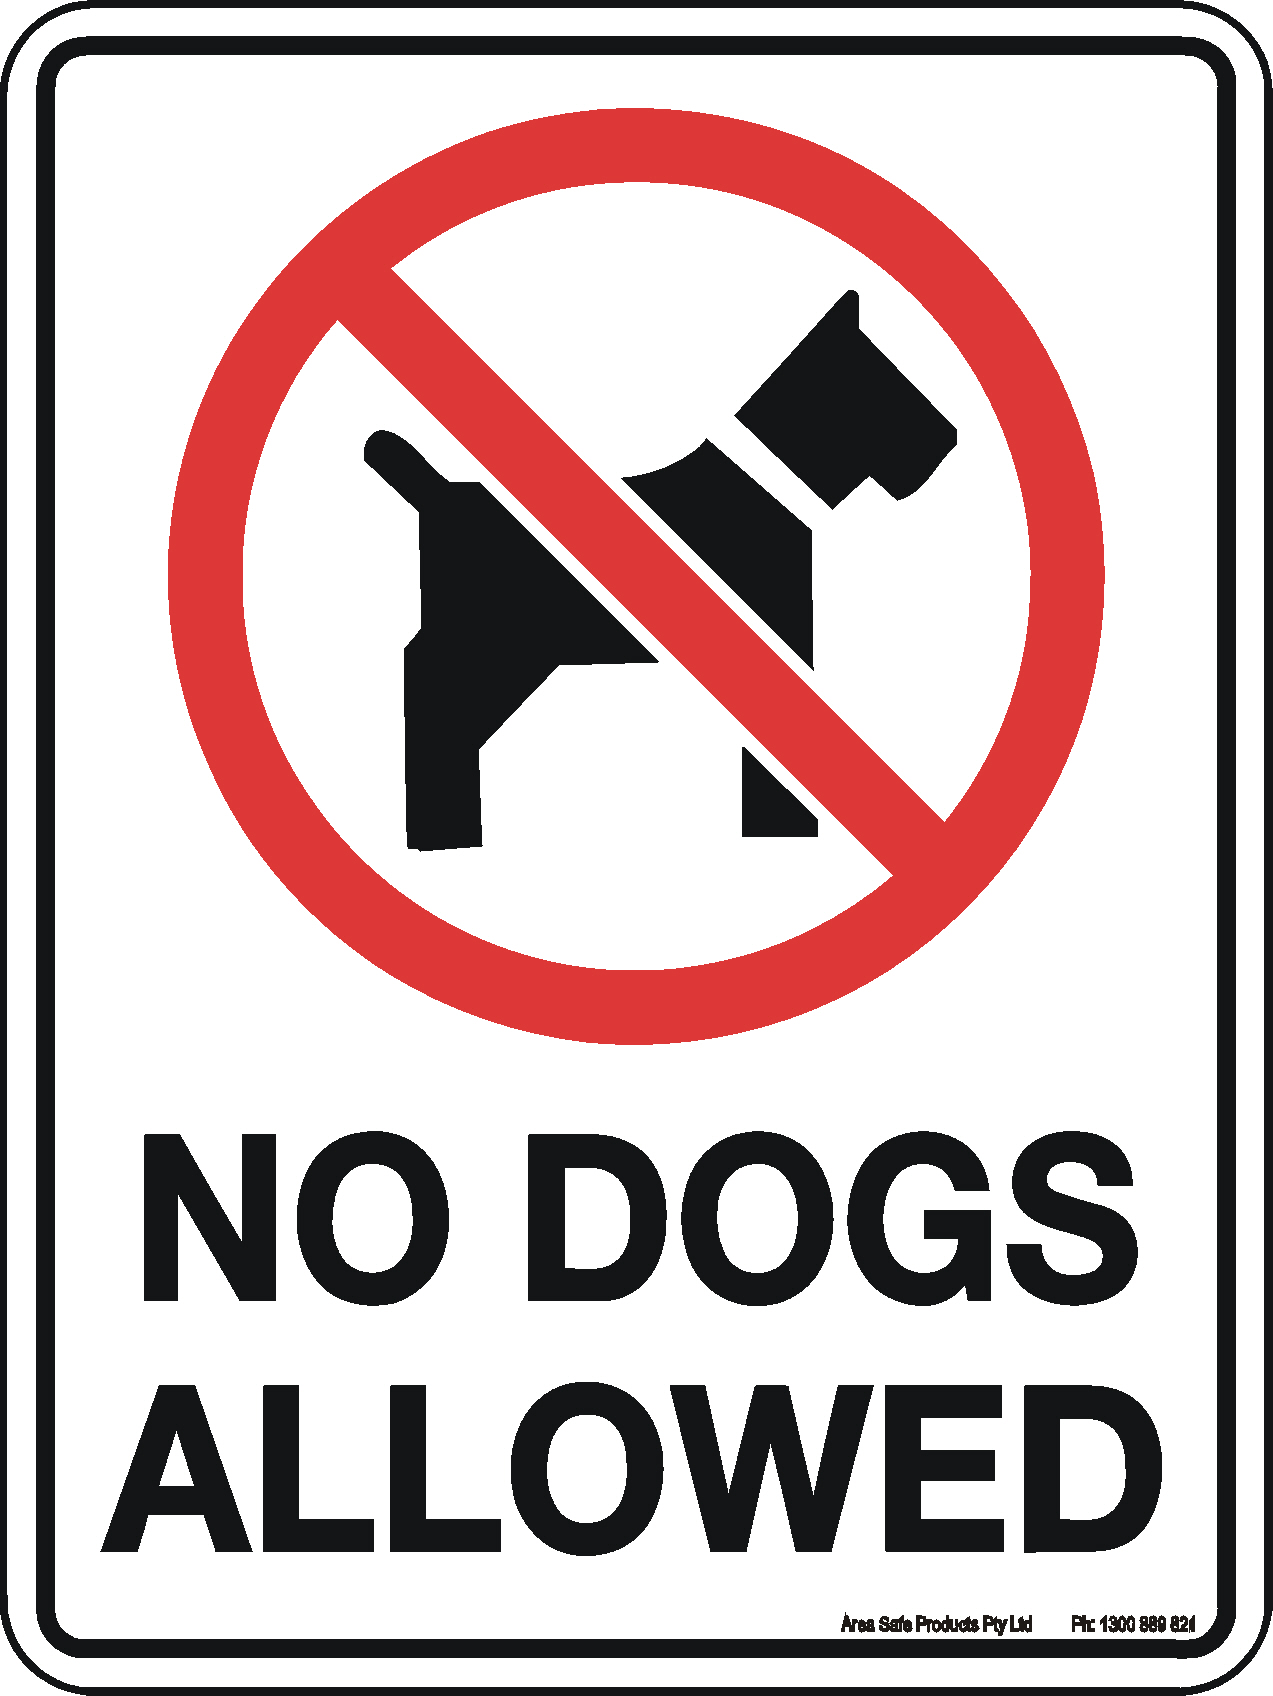 Property is not allowed. No Dogs allowed. No Dogs allowed sign. Знак Russians and Dogs are not allowed. Not allowed Dog.